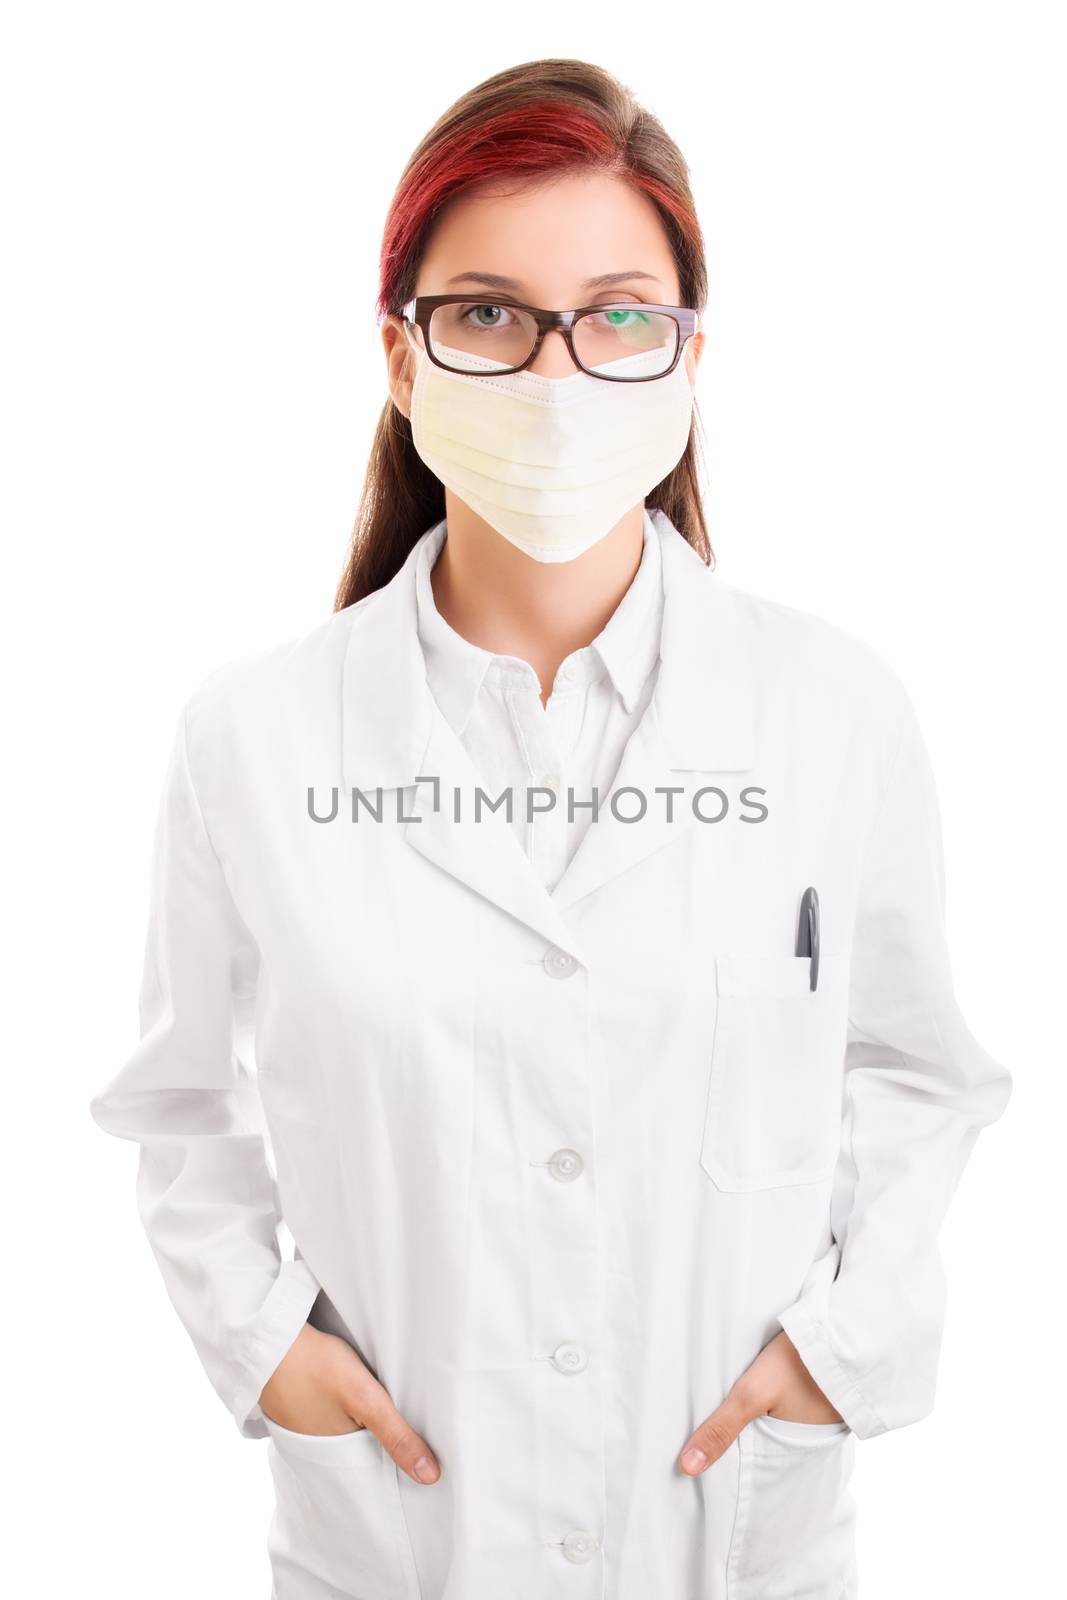 Medicine, science and profession concept. Serious looking young female doctor or scientist or pharmacist or chemist in white uniform coat, glasses and mask with hands in her pockets, isolated on white background. Bad news concept.